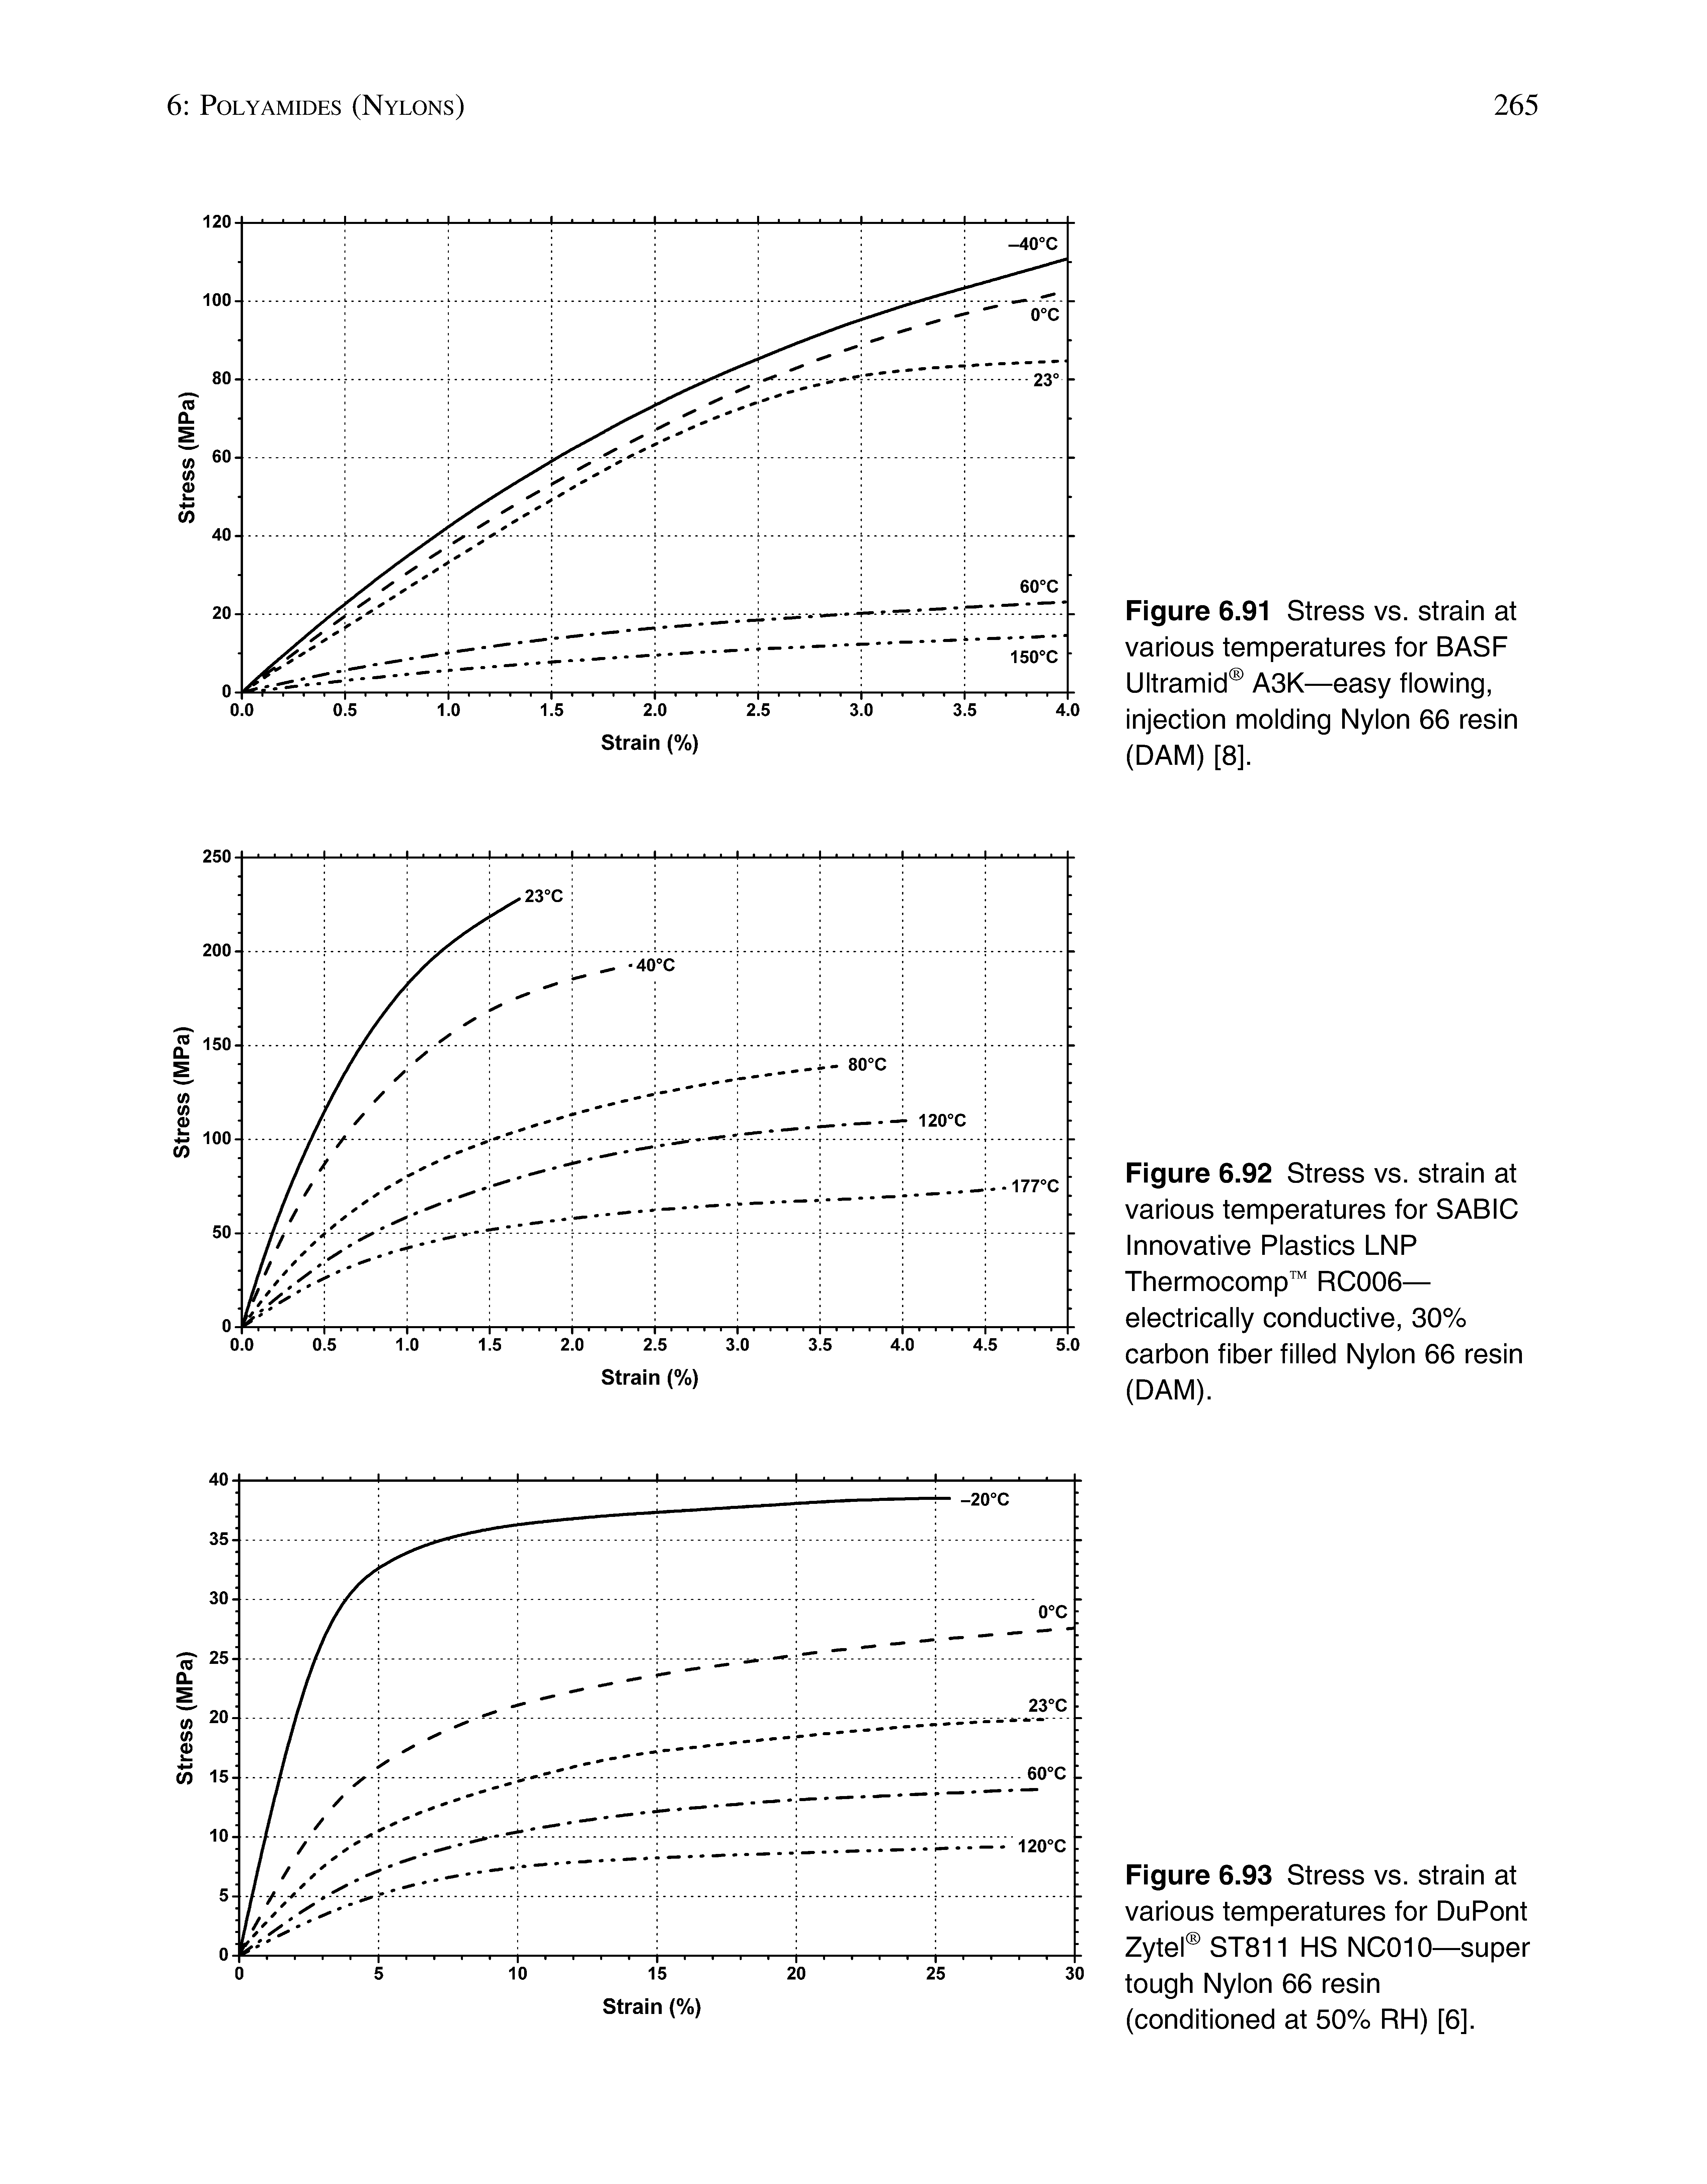 Figure 6.91 Stress vs. strain at various temperatures for BASF Ultramid ASK—easy flowing, injection molding Nylon 66 resin (DAM) [8],...